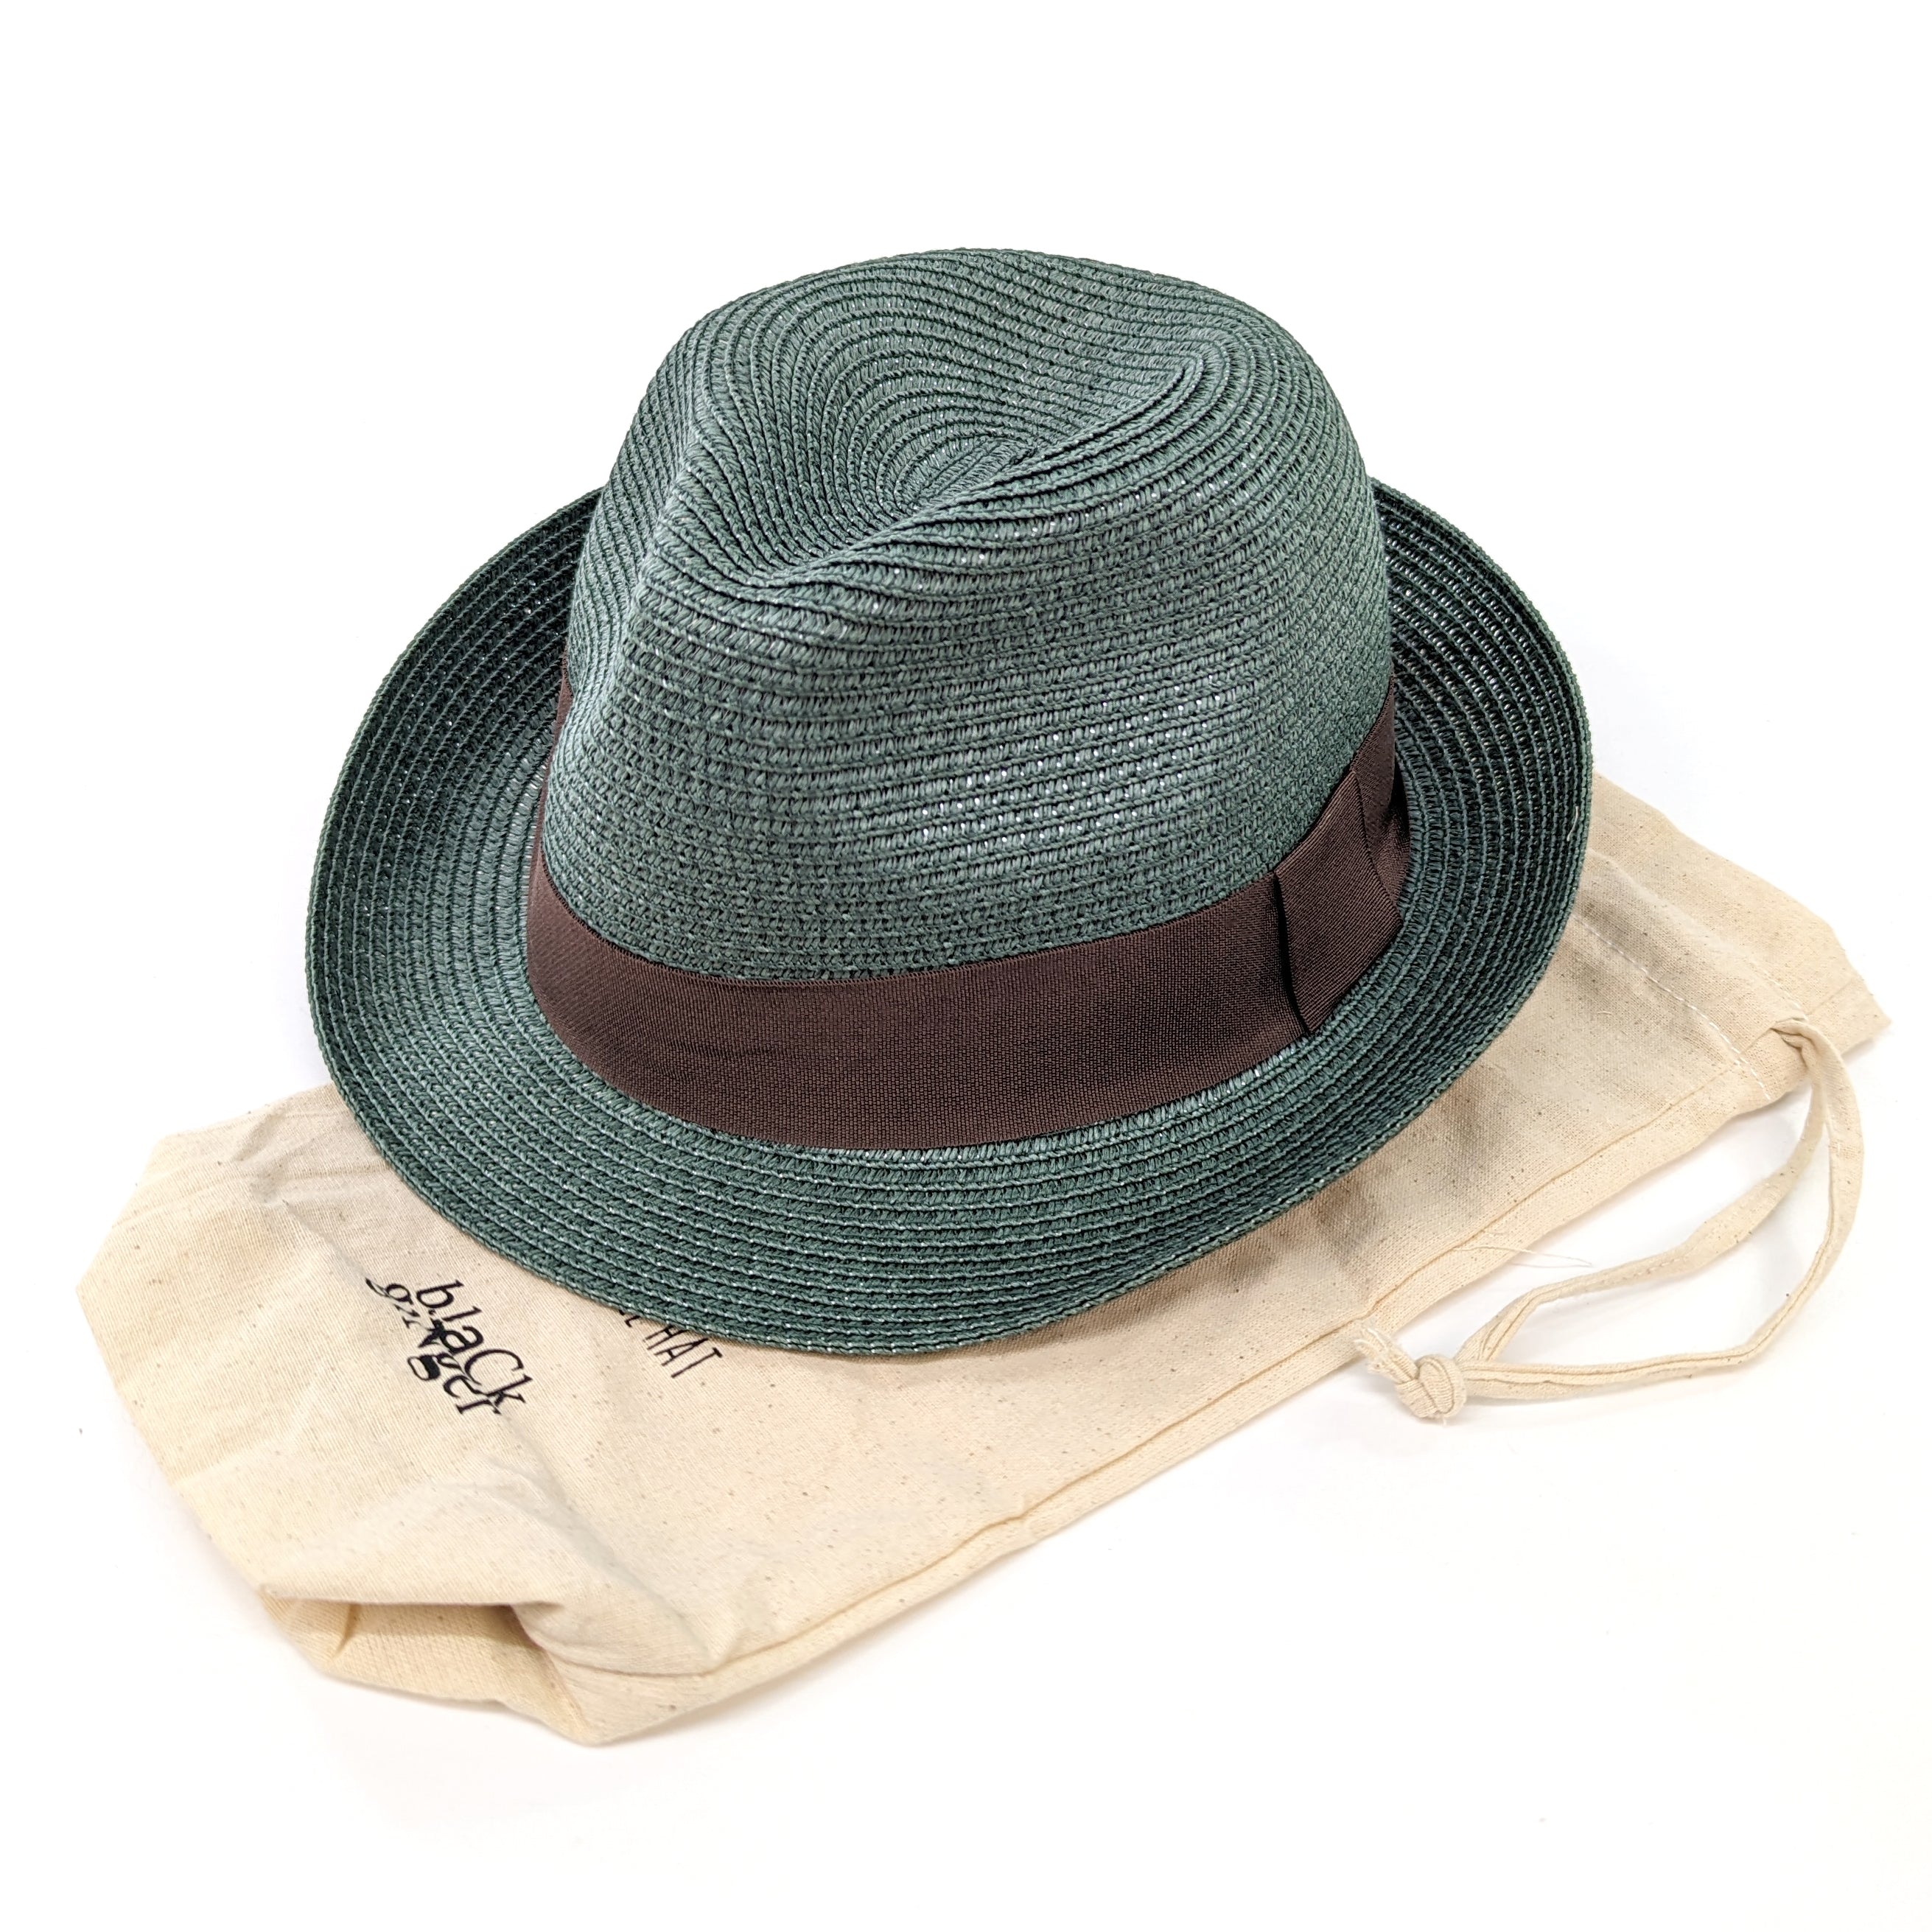 Folding Trilby Style Travel Sun Hat - Teal Green (57cm)